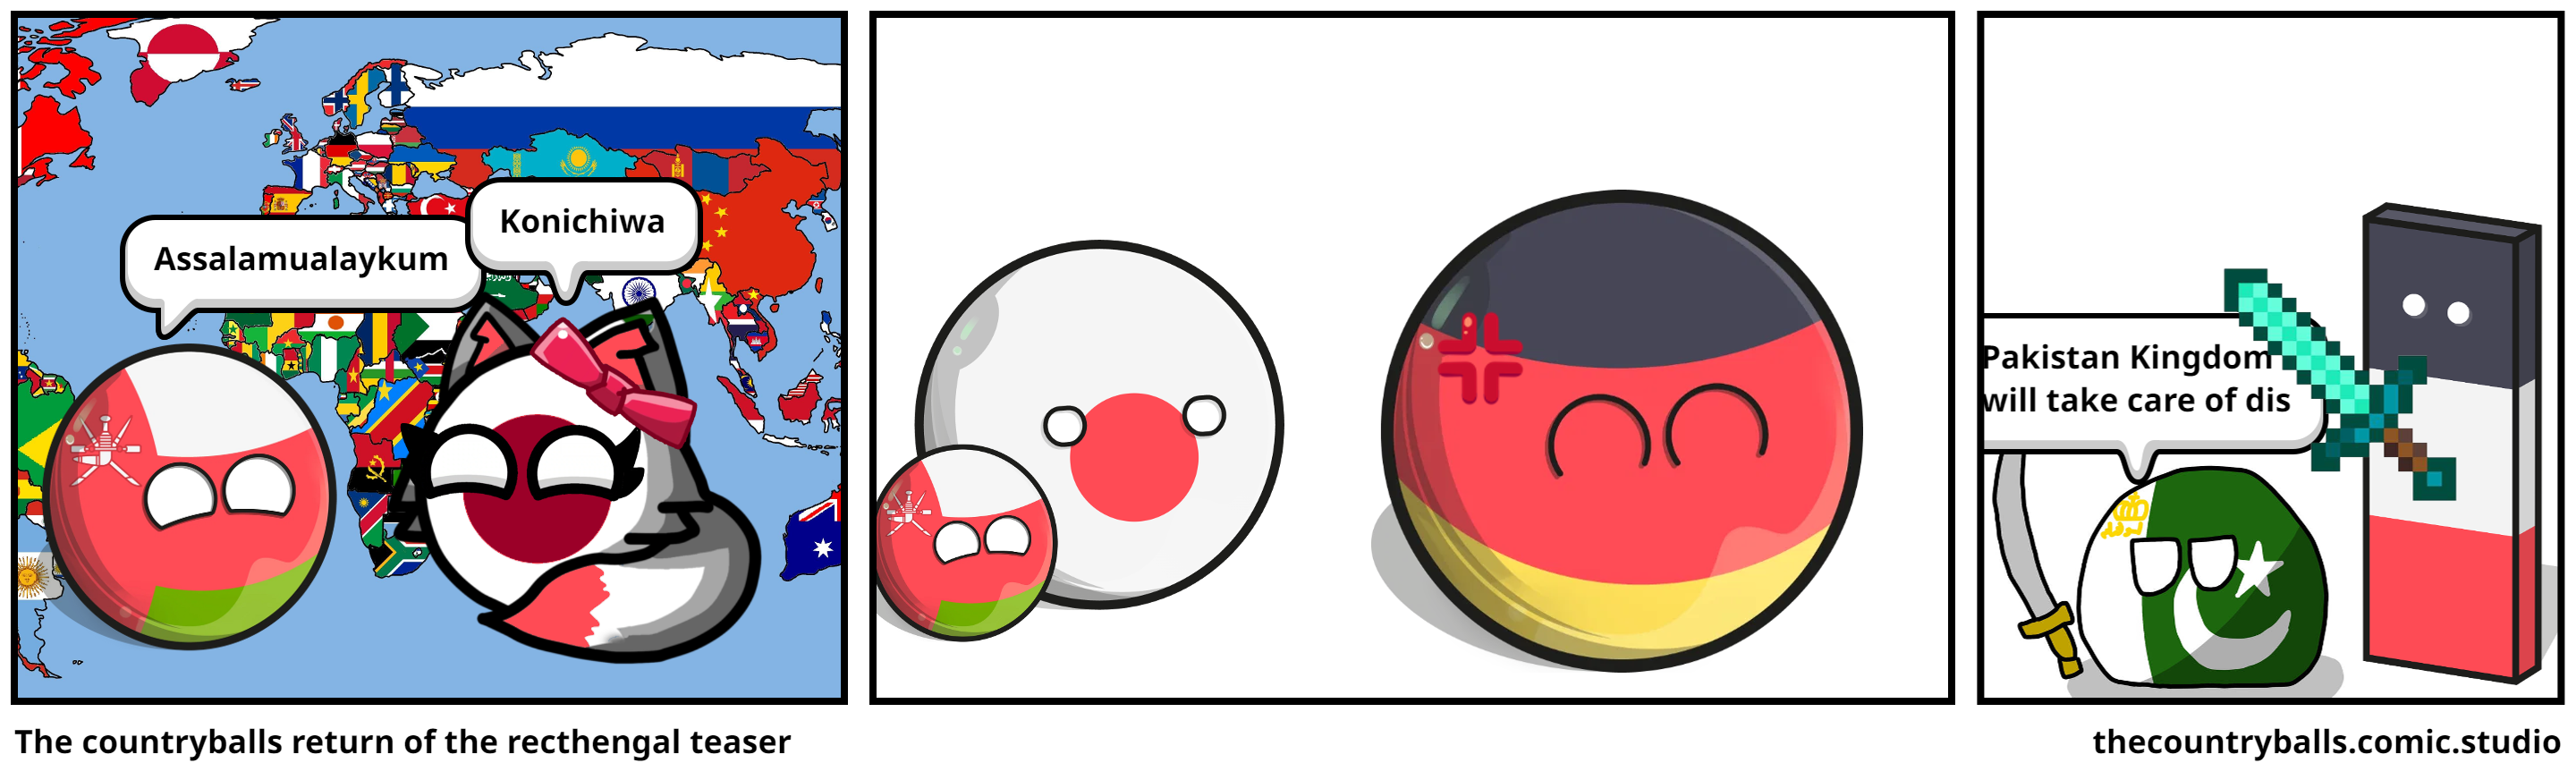 The countryballs return of the recthengal teaser